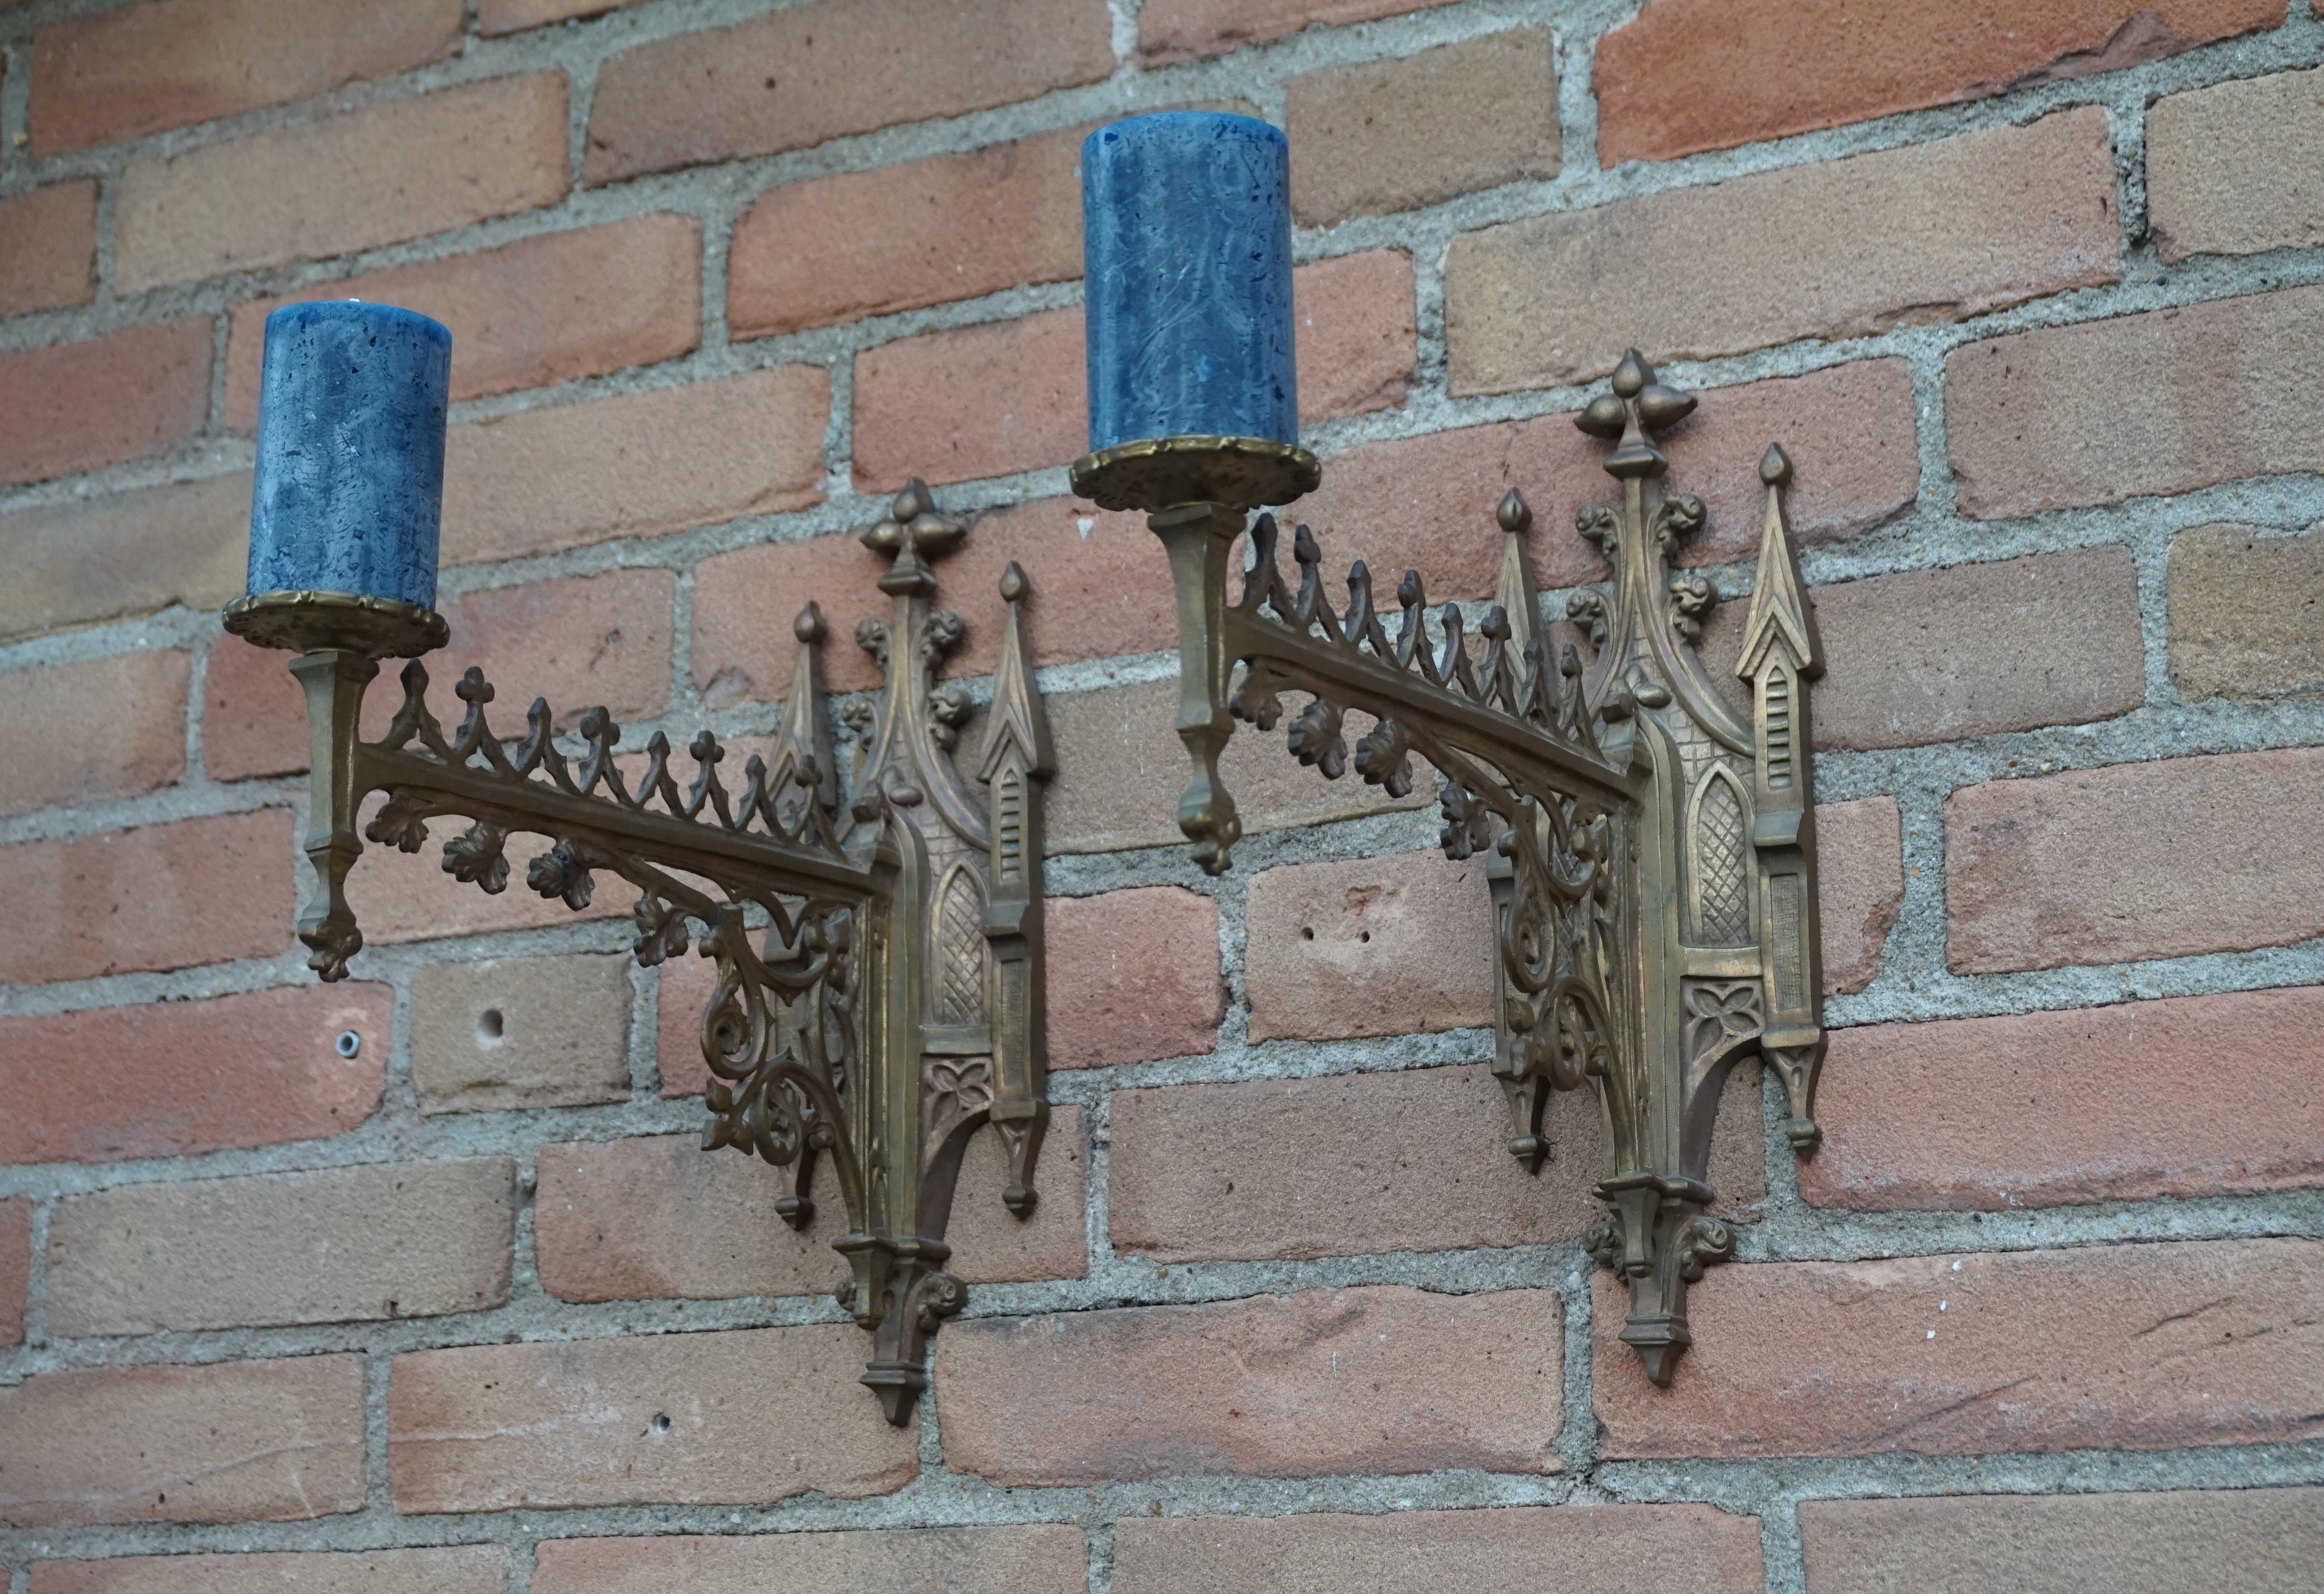 Antique pair of gilt bronze, Gothic Revival candle sconces.

For the collectors of Gothic Revival antiques we offer this rare pair of stylish and highly decorative bronze sconces. Handcrafted, circa 1900 these would have initially been golden